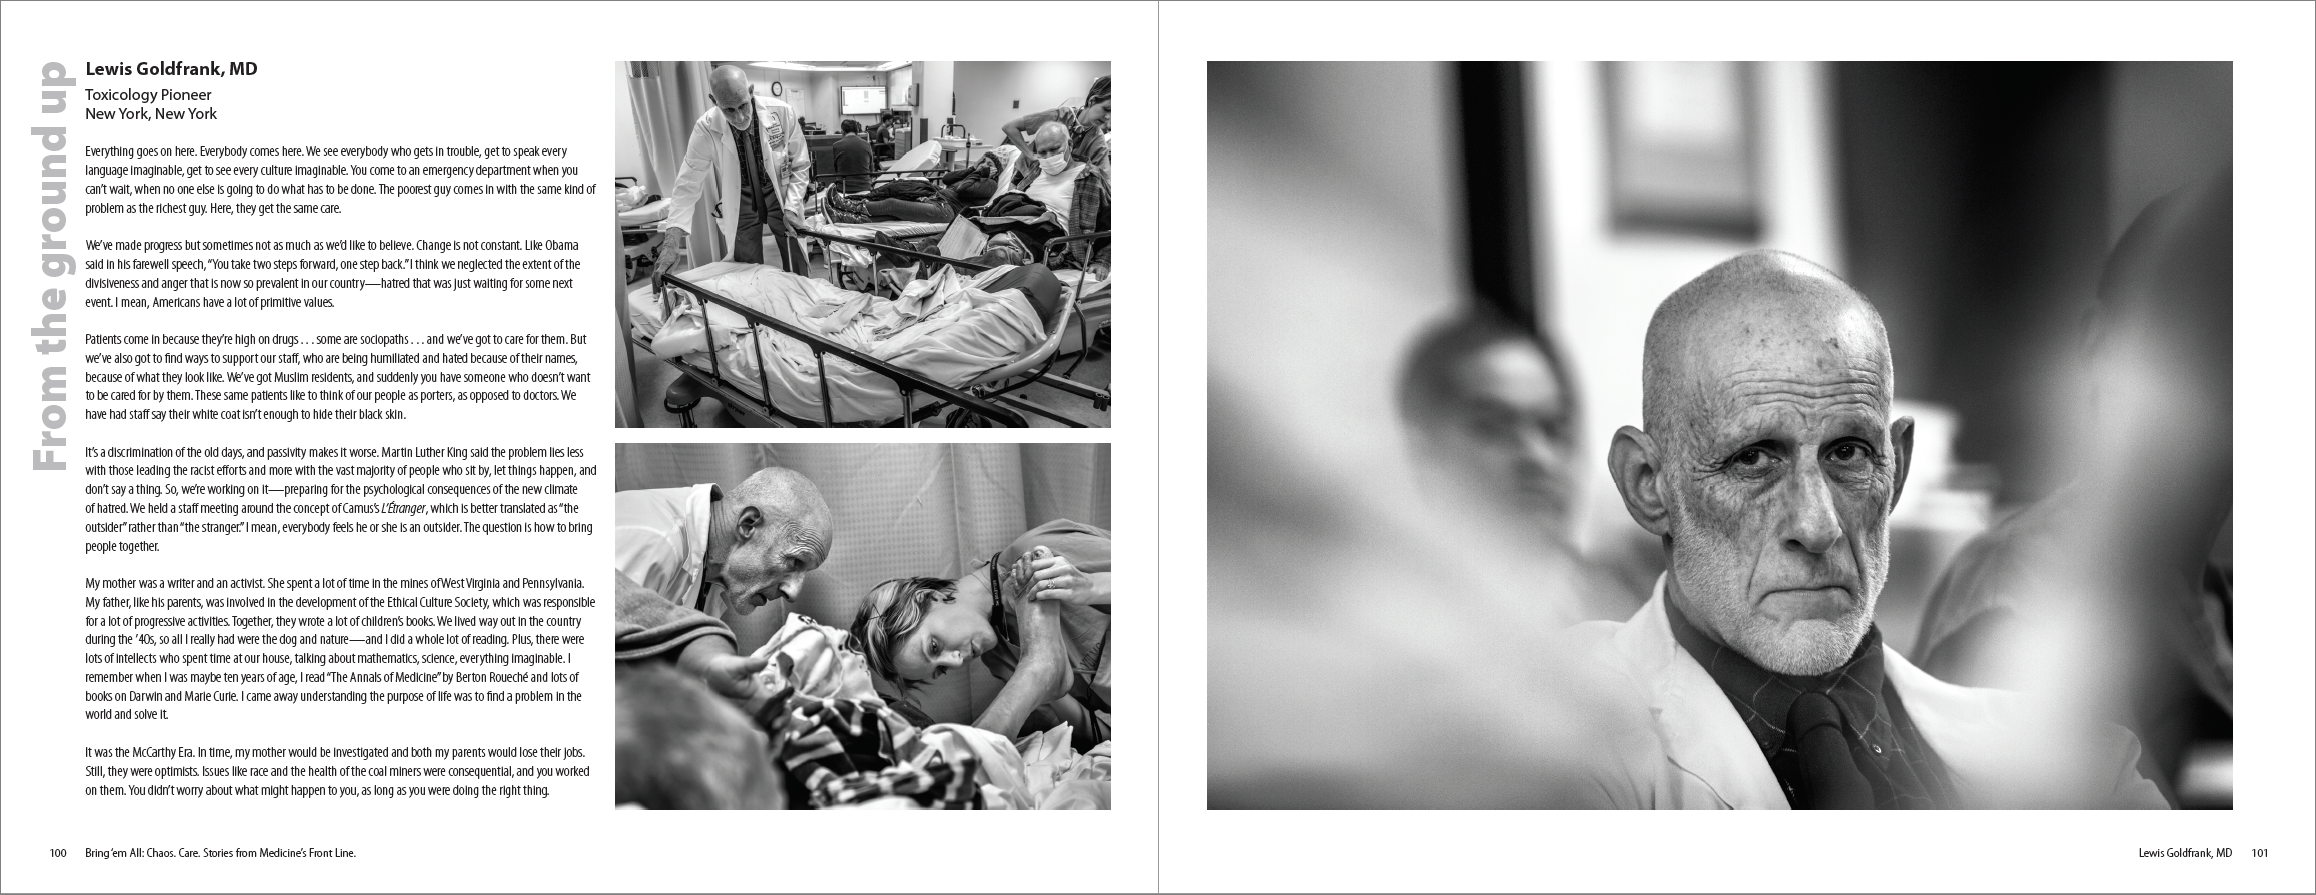  From Bring 'em All (American College of Emergency Physicians, 2018), with photographs and interviews by Eugene Richards. The 50 stories speak of the selflessness and courage of emergency medicine doctors, nurses, paramedics, health aides, firefighte